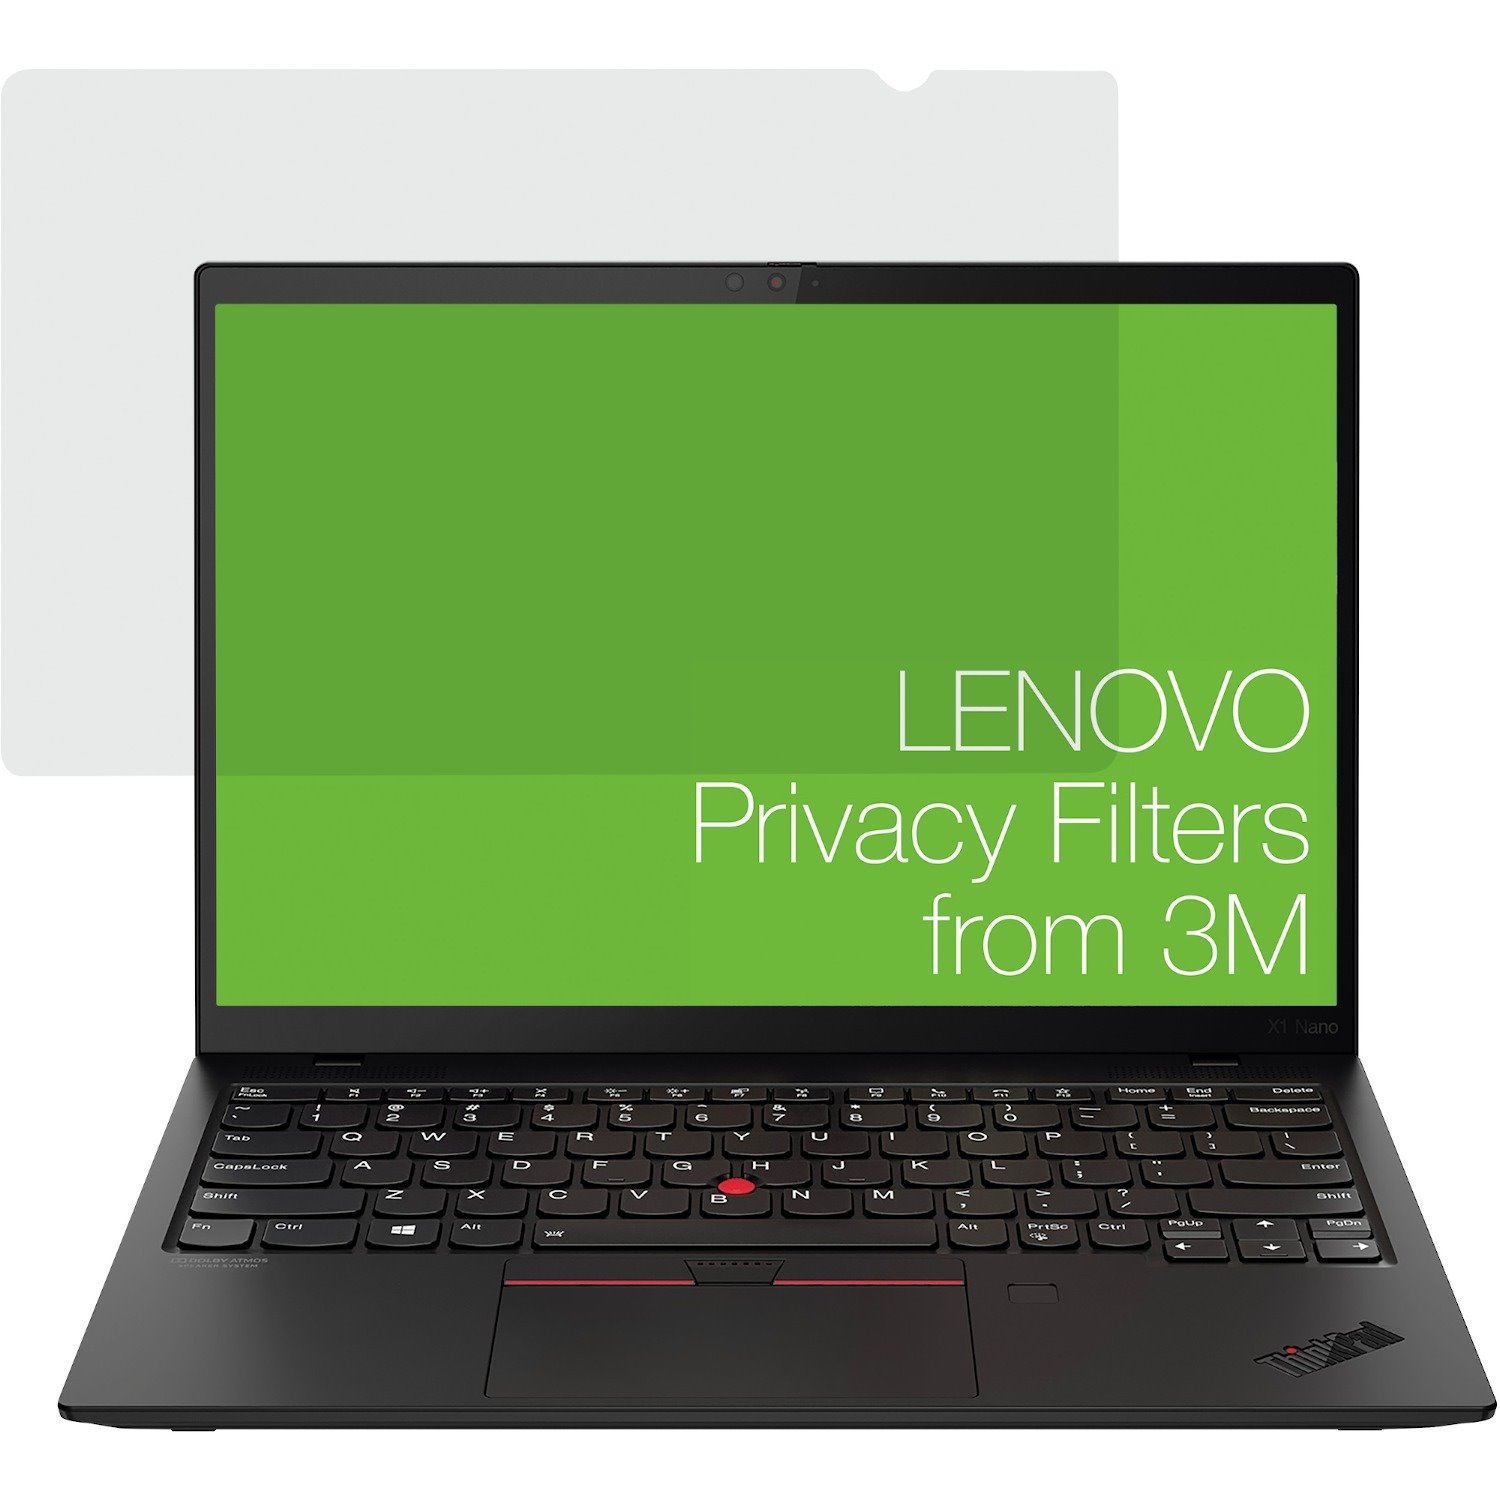 LENOVO 13.0 INCH 1610 PRIVACYFILTER FOR X1 NANO WITH COMPLYATTACHMENT FROM 3M